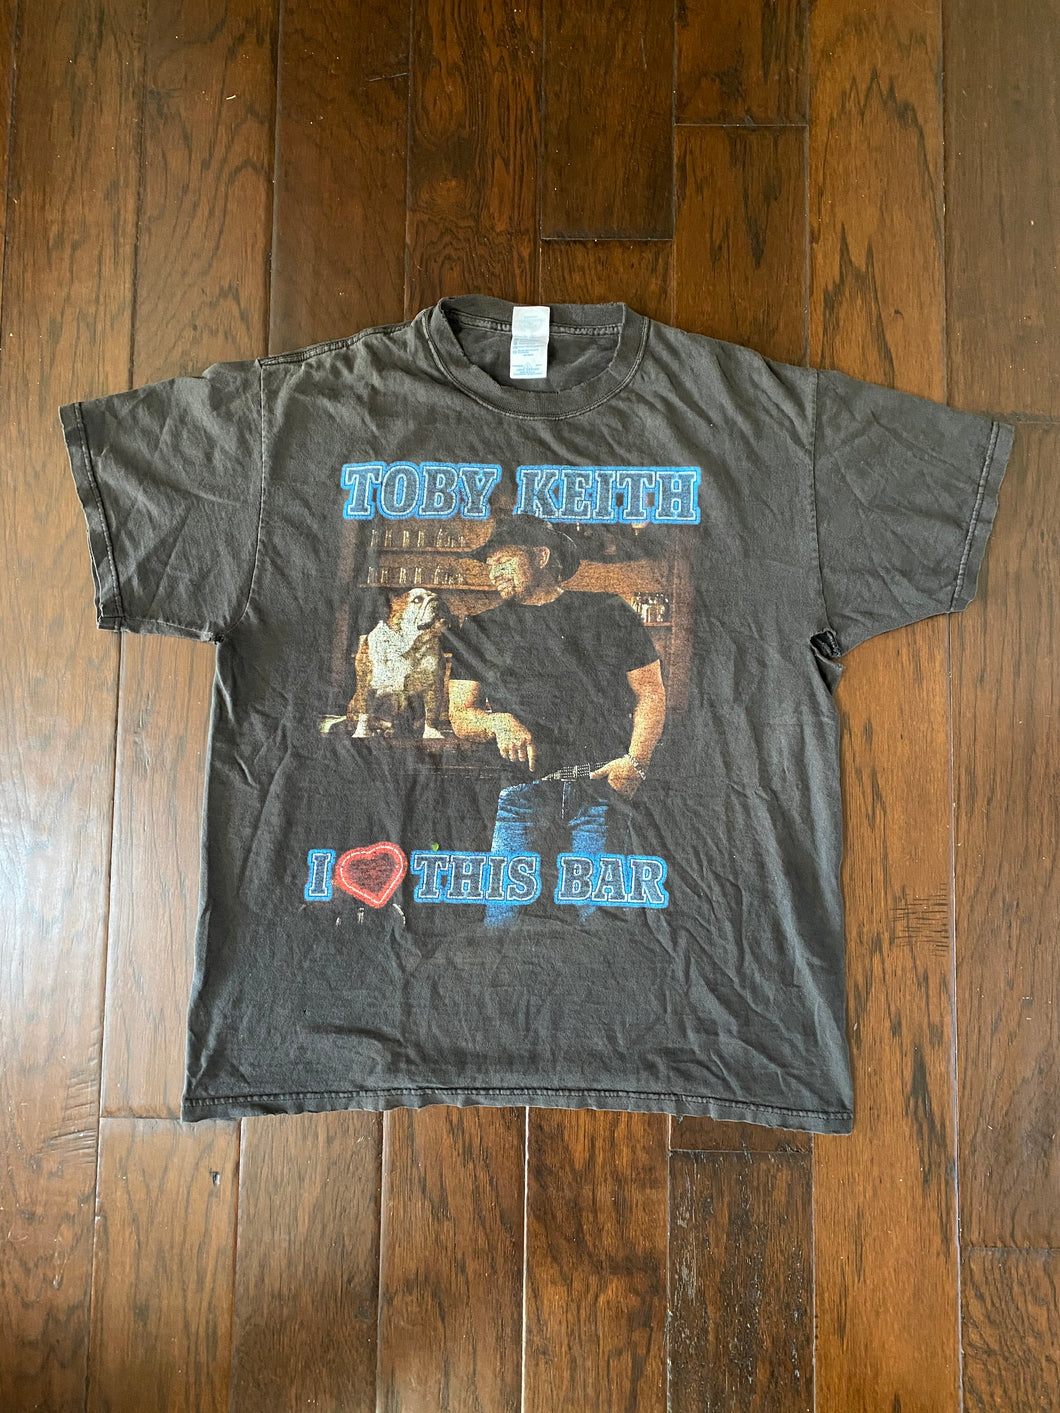 Toby Keith 2003 “I Love This Bar” Vintage Distressed T-shirt